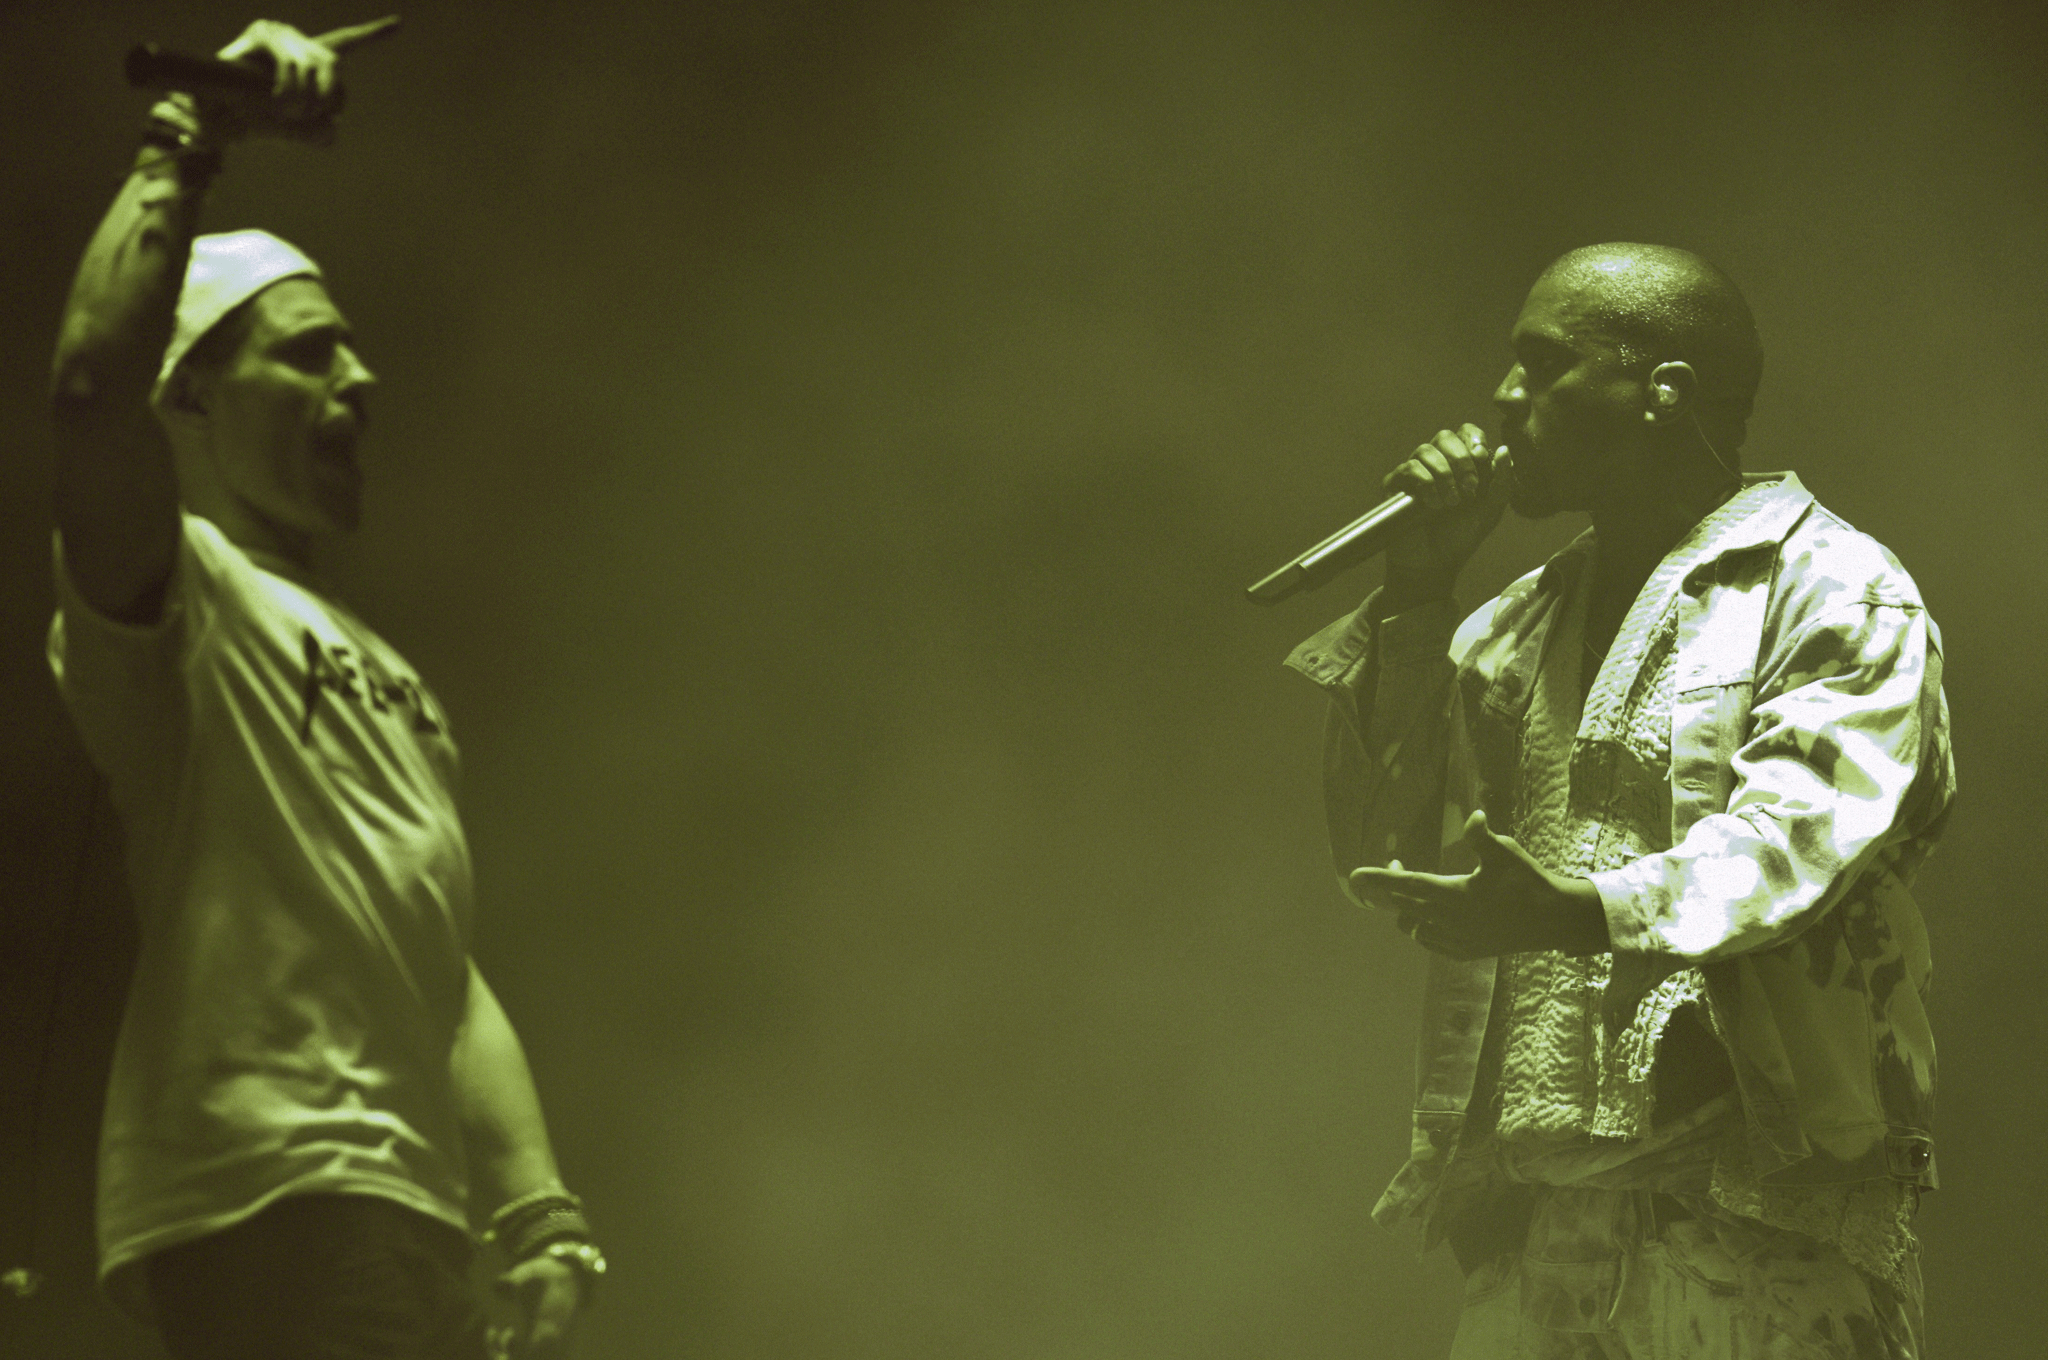 Lee Nelson invades the stage during Kanye West's headline slot at Glastonbury 2015